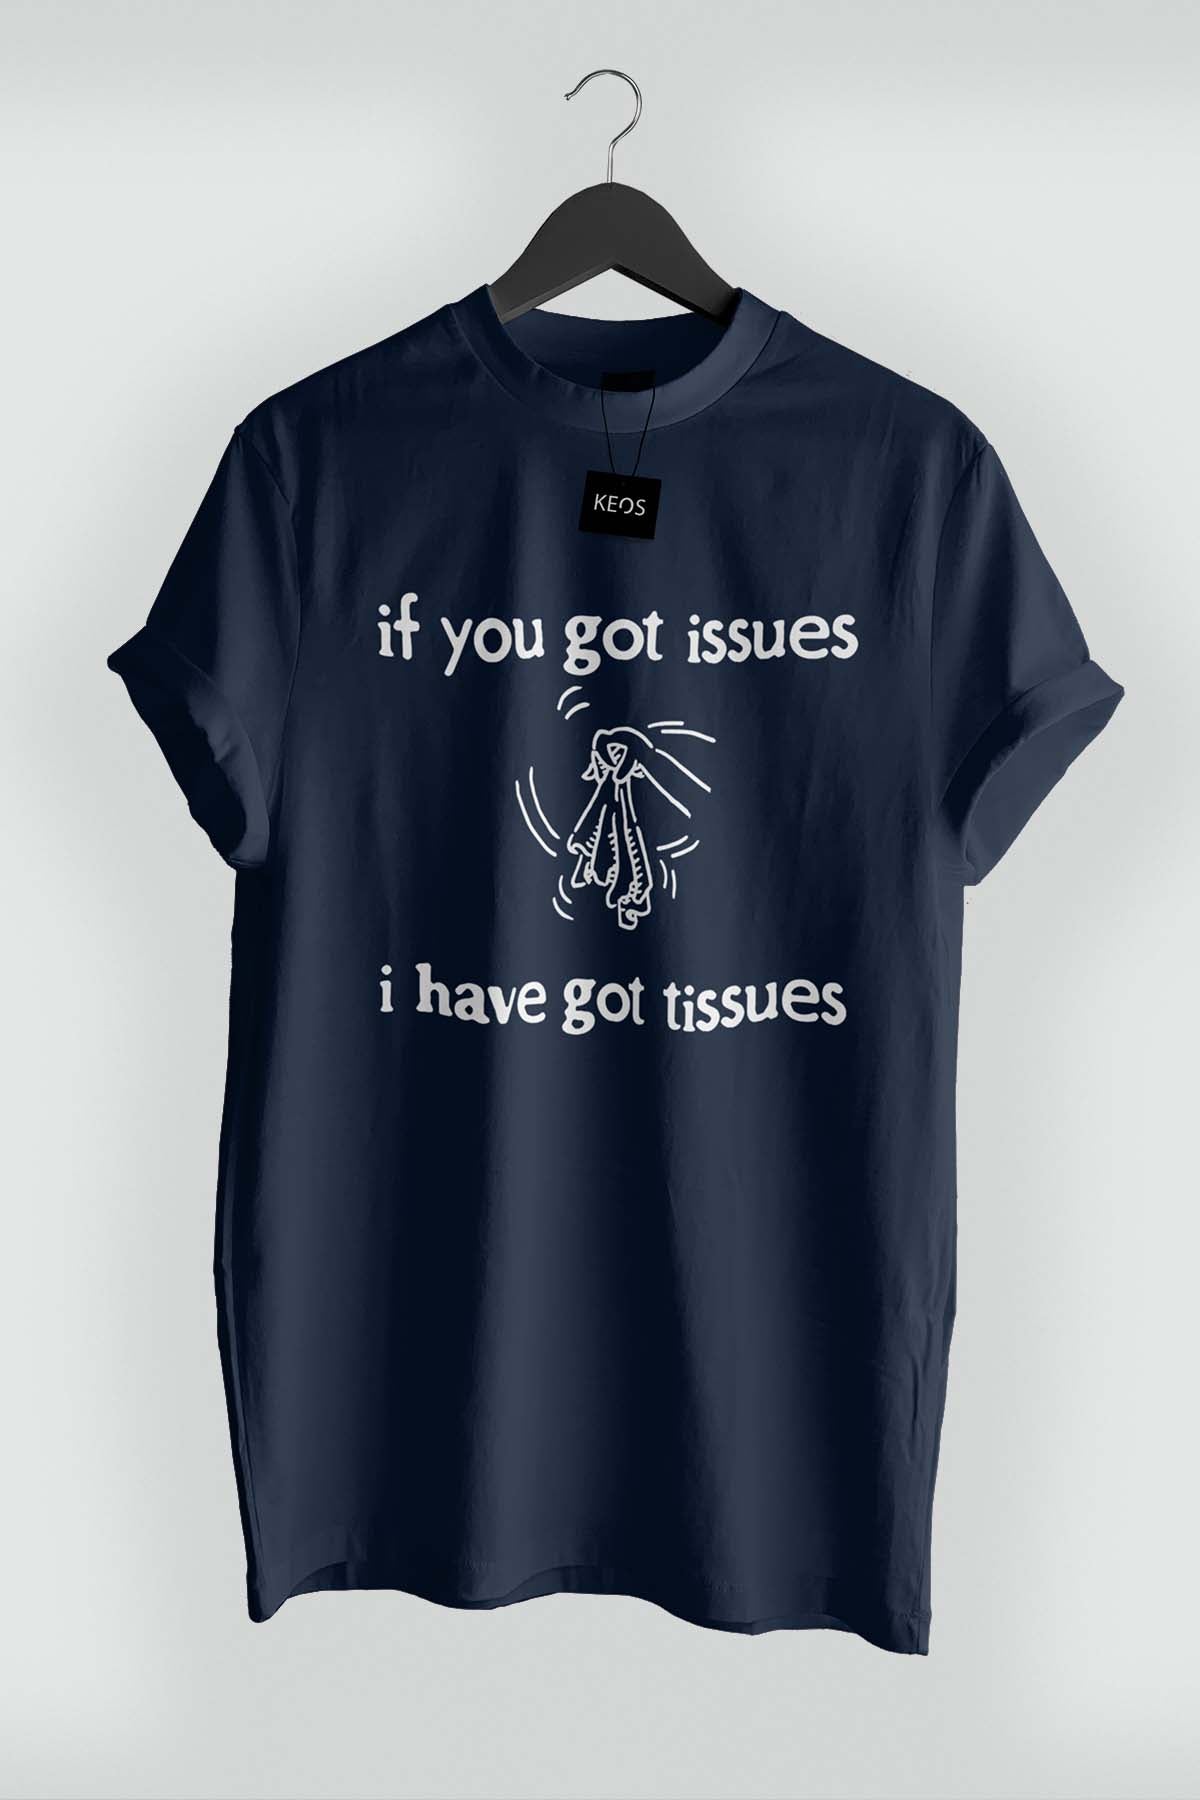 Tissues For Issues Organic Cotton T-shirt - keos.life